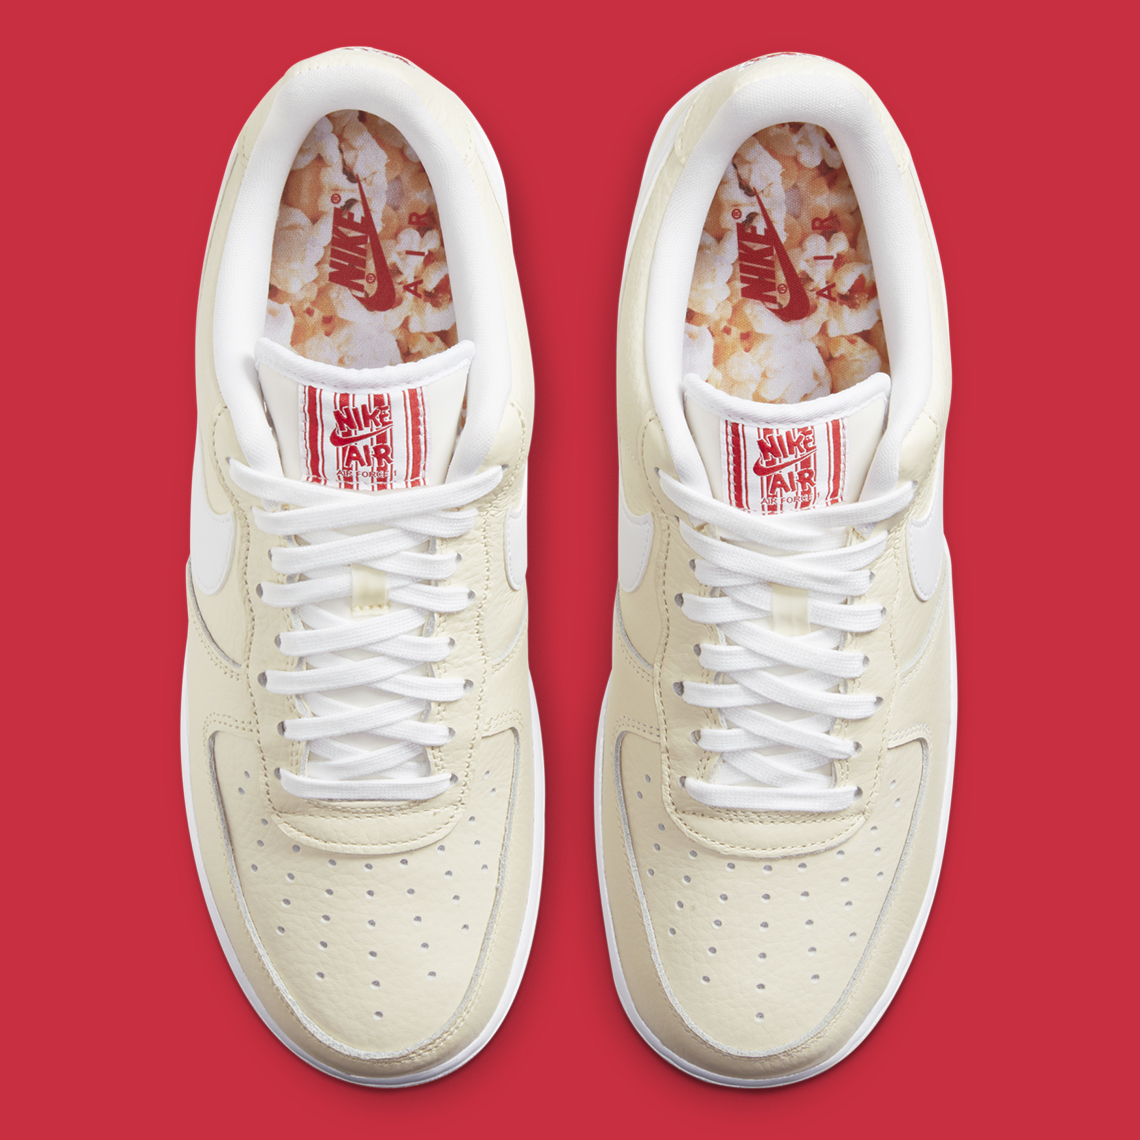 popcorn air force 1 release date